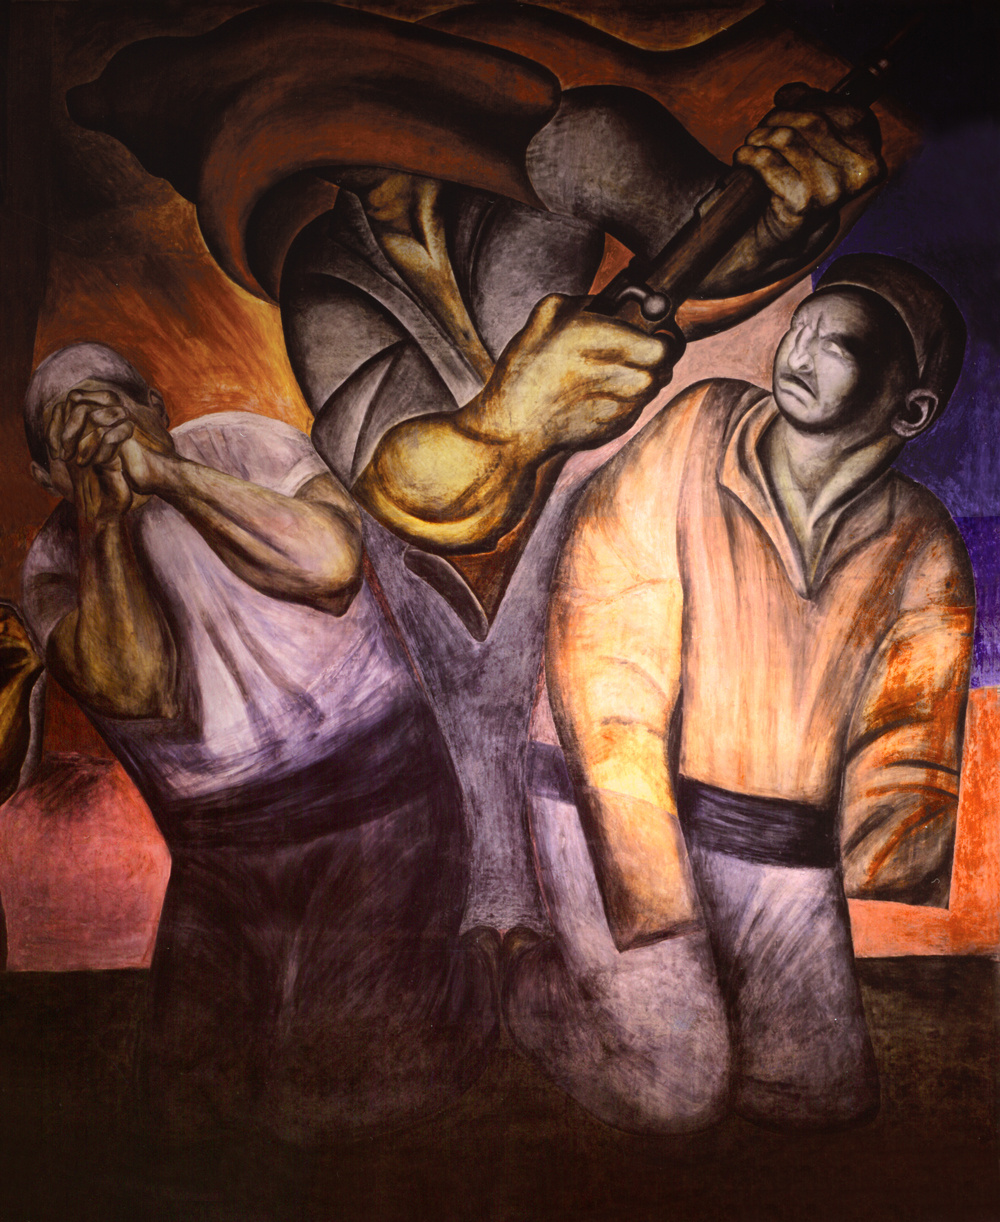 An abstract painting of 3 men. The man to the left is on his knees with his hands held together in front of his face. The man in the middle has his face covered in fabric and is holding a gun. The man to the right is on his knees looking annoyed.